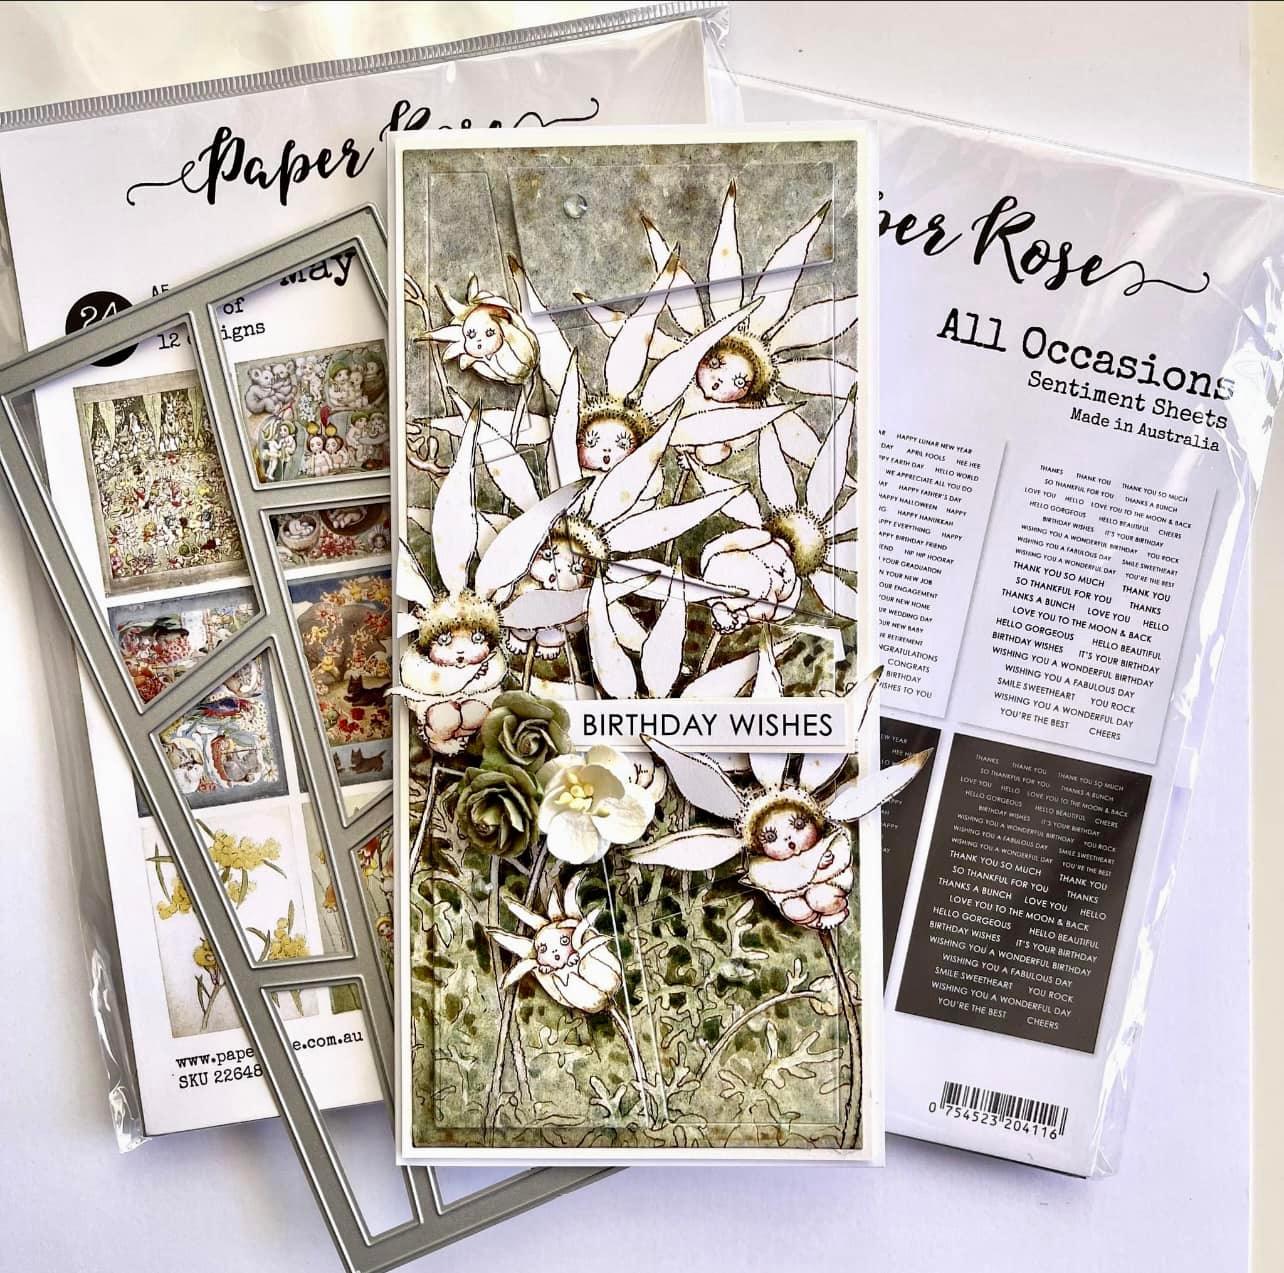 Paper Rose - May Gibbs - Classics A5 24pc  Paper Pack